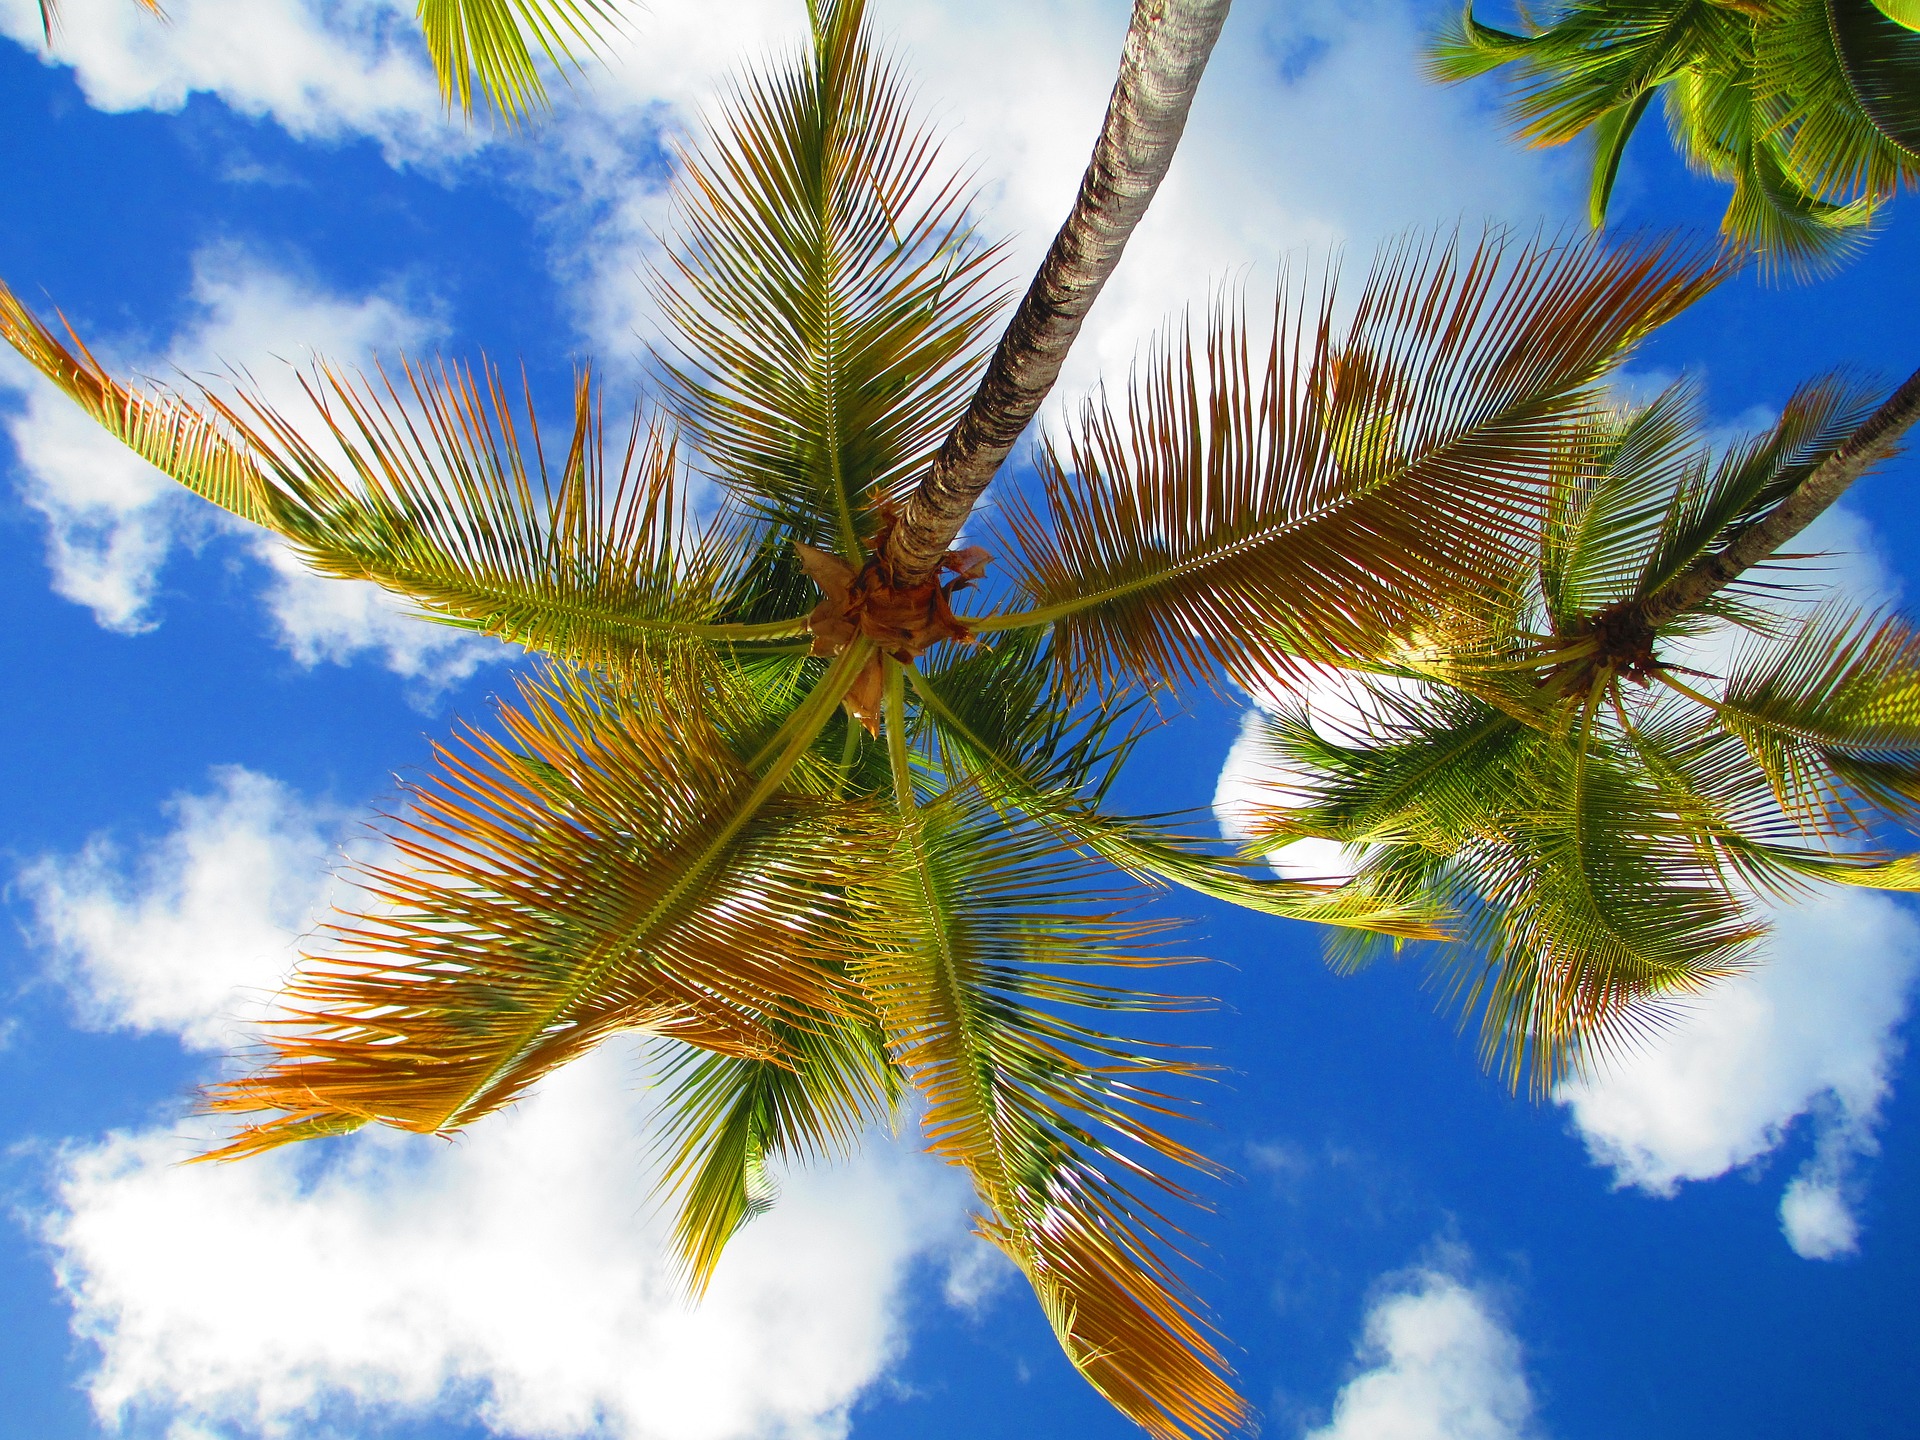 "Palm Tree" photo by thetravelnook on Pixabay